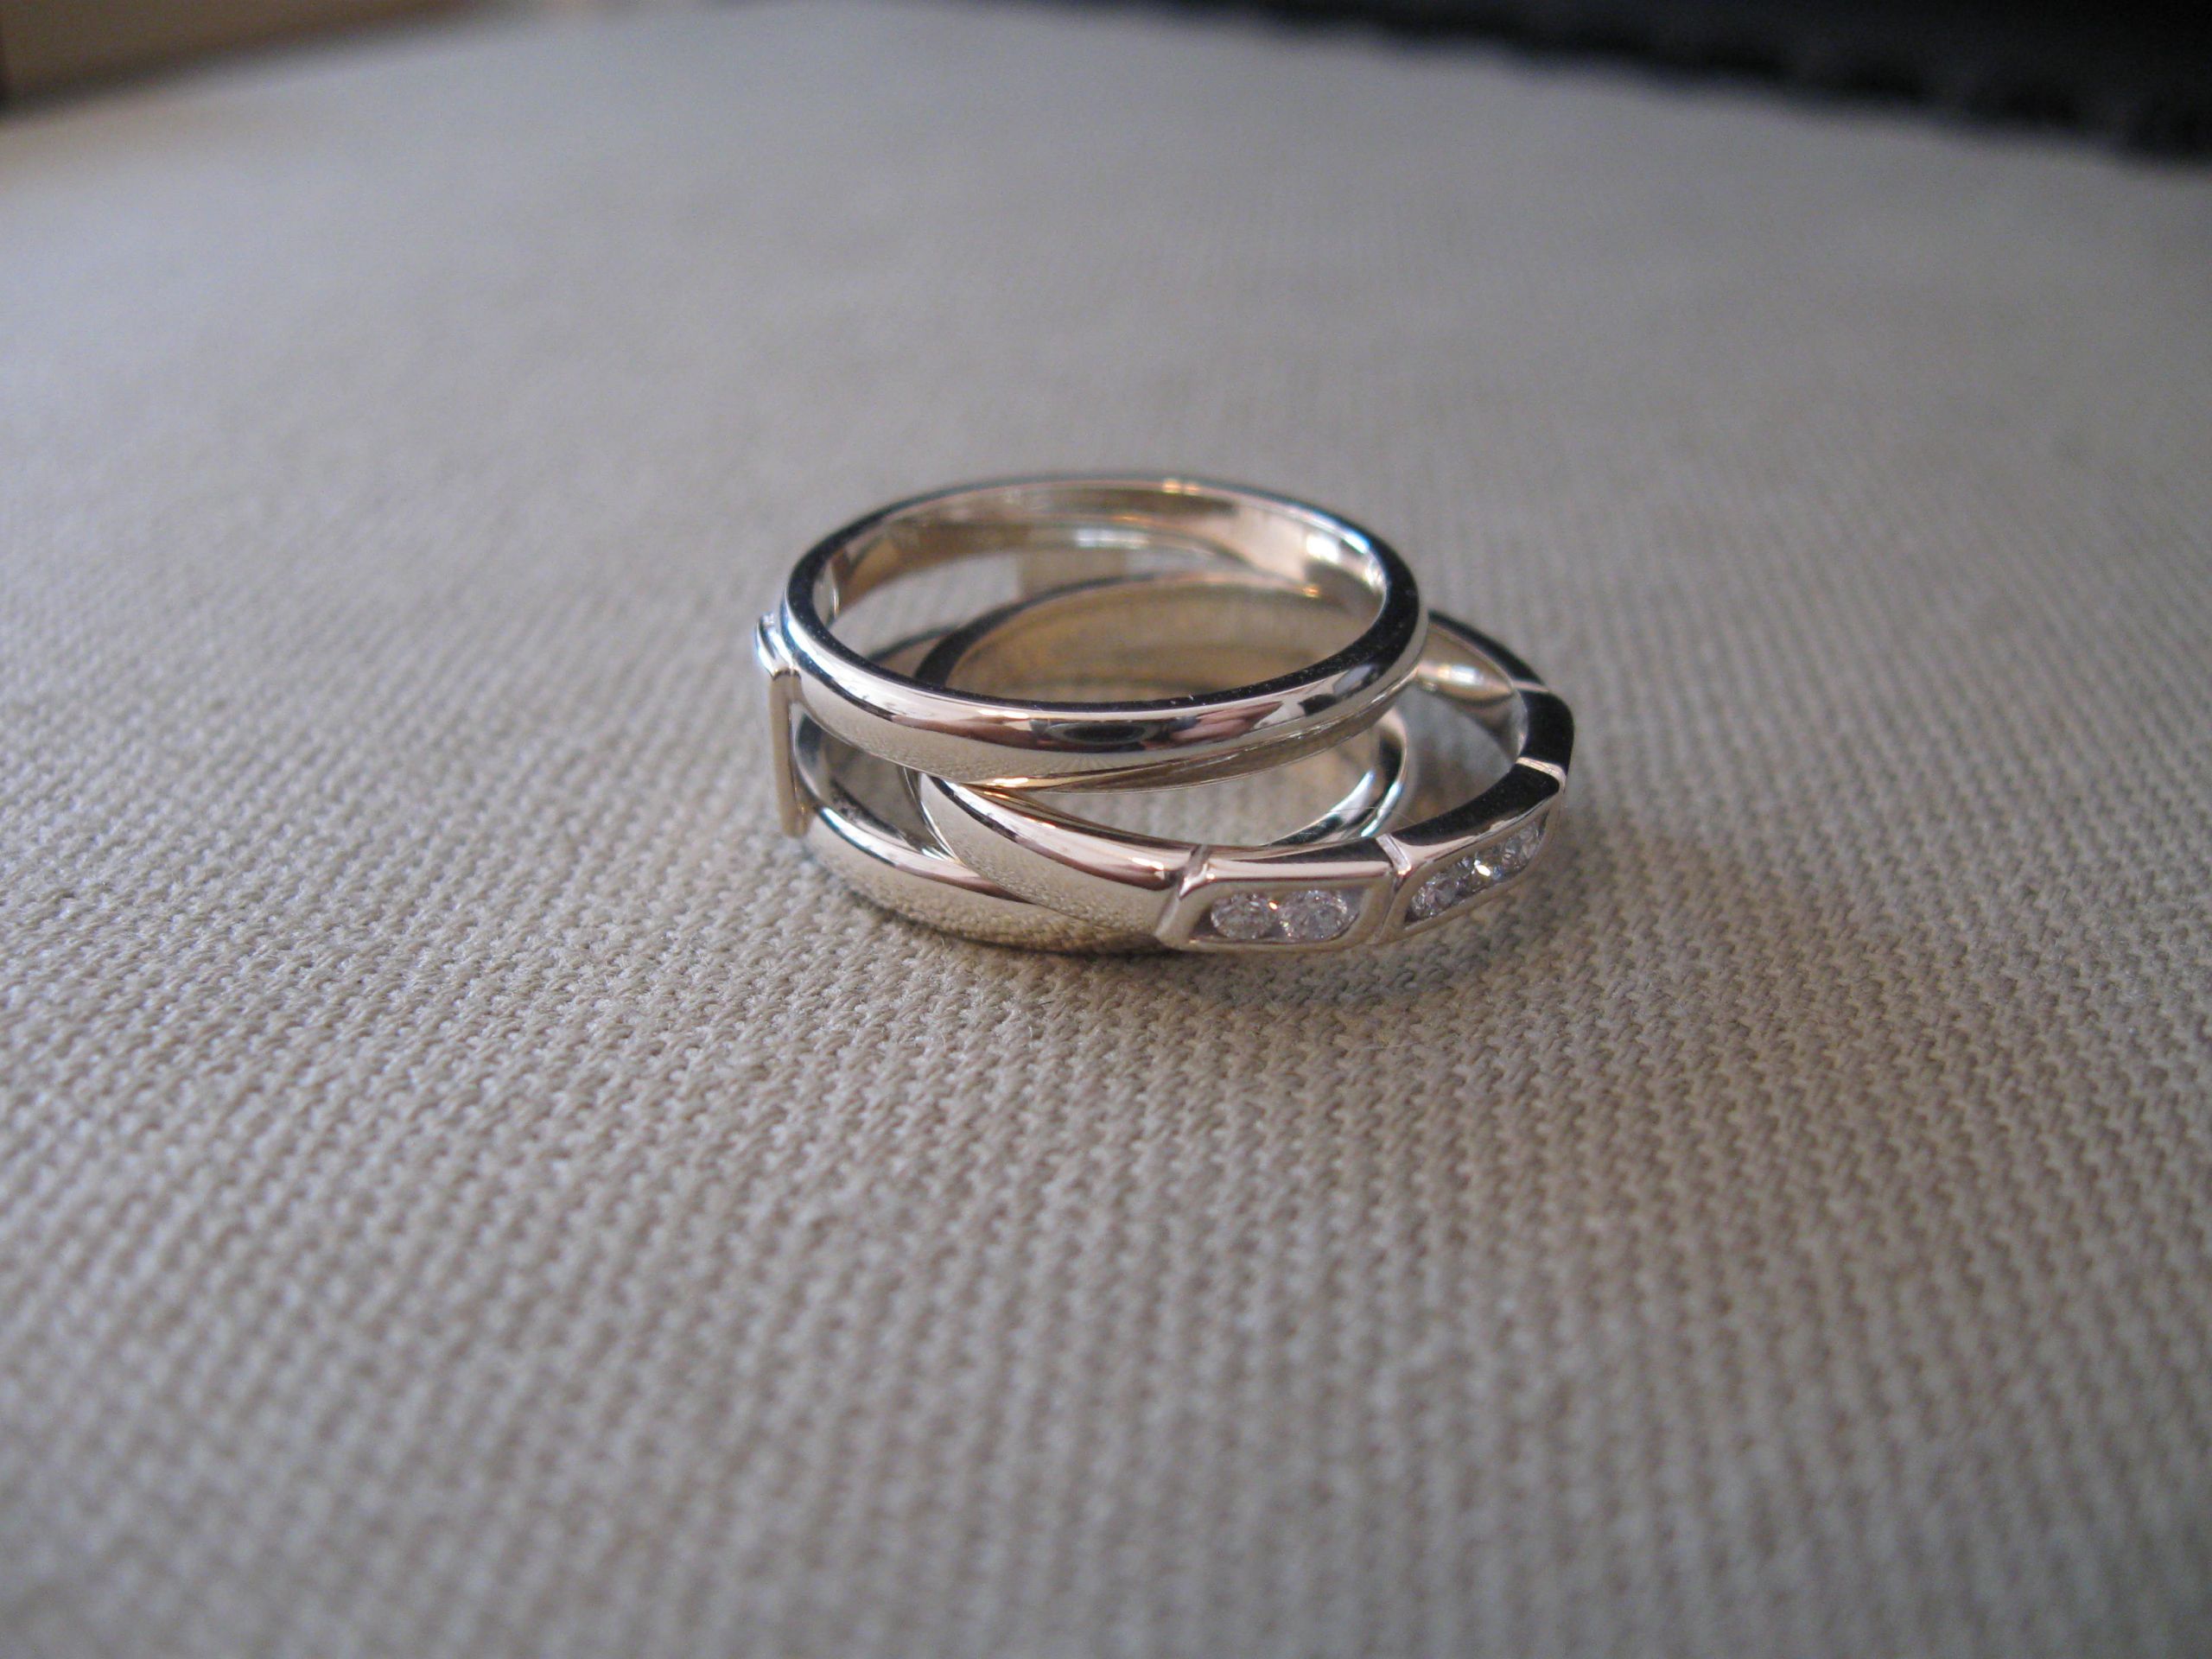 Double Band Wedding Ring
 Wedding Band with a difference